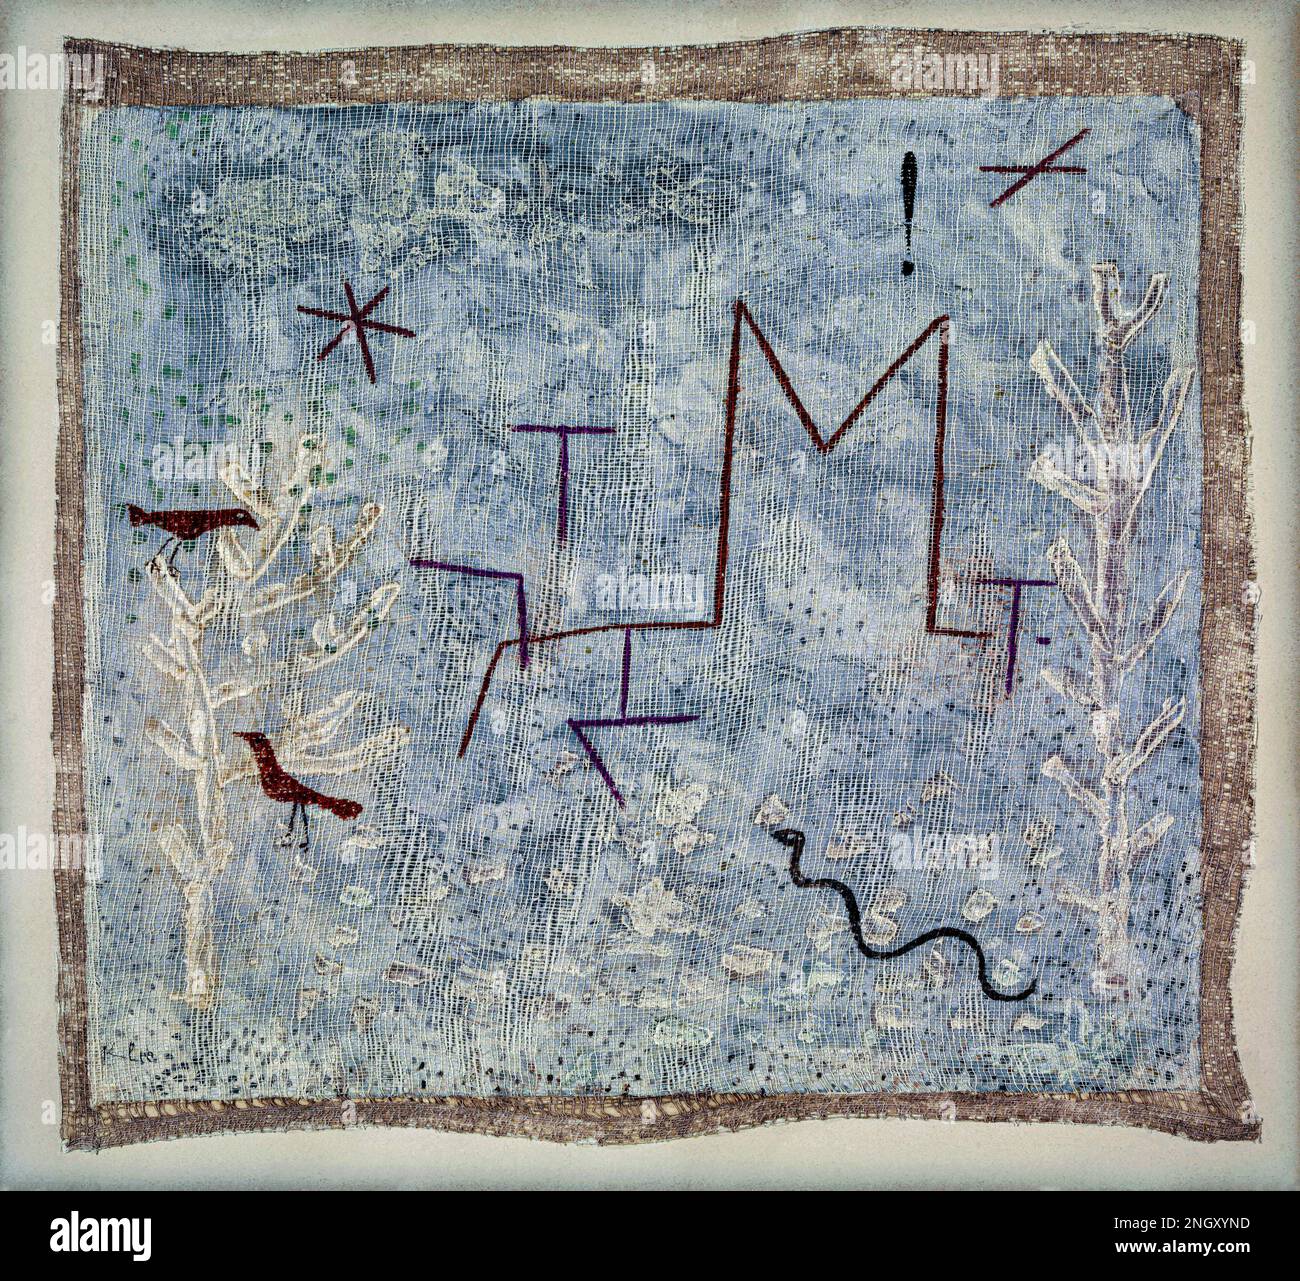 Garden gate K (1932) painting in high resolution by Paul Klee. Original from the Kunstmuseum Basel Museum. Stock Photo